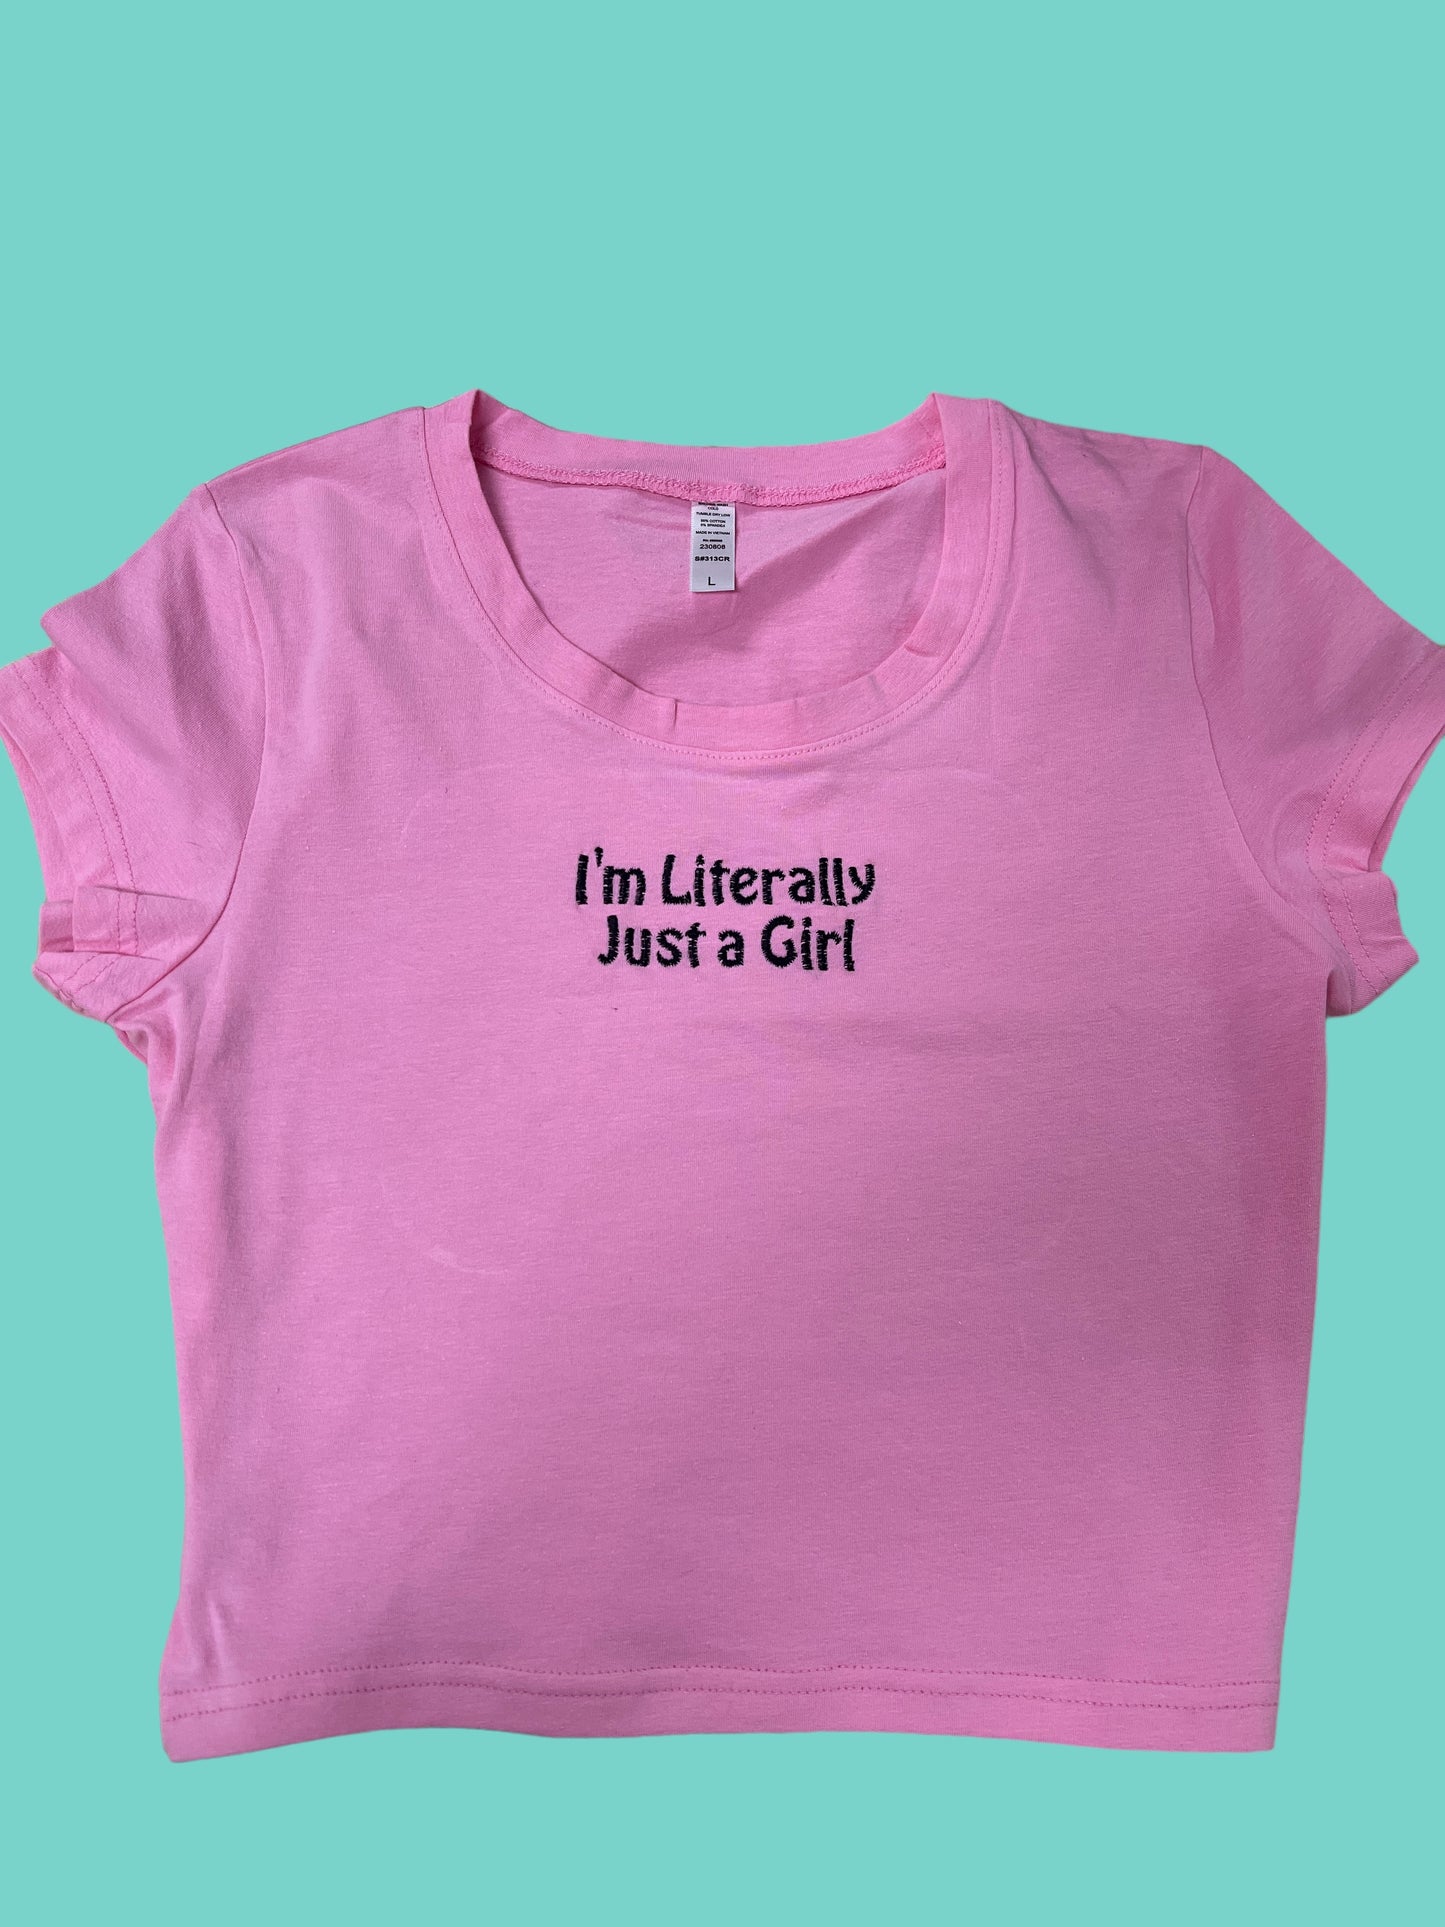 a pink shirt that says i'm literally just a girl